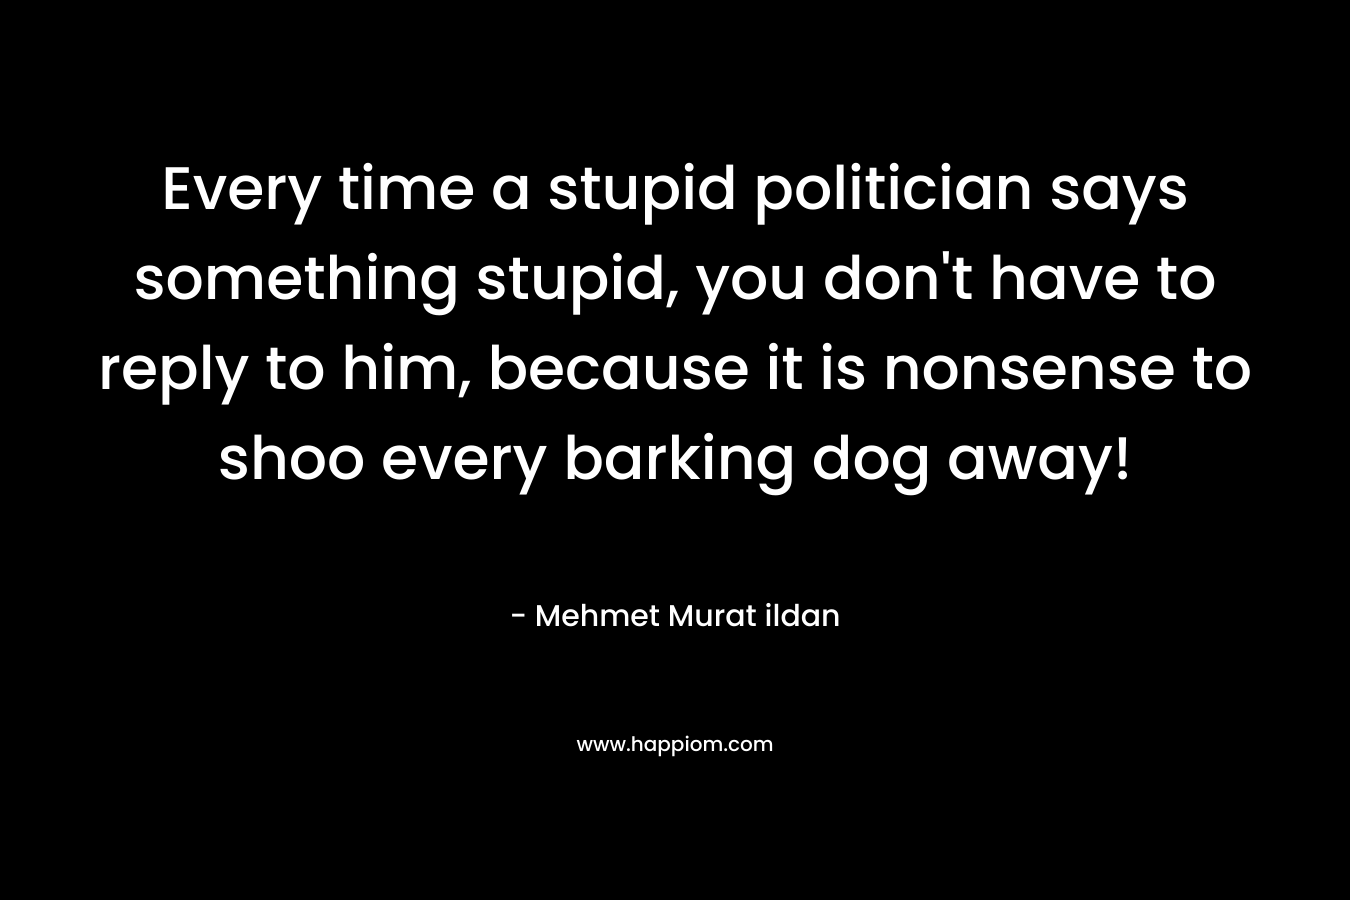 Every time a stupid politician says something stupid, you don't have to reply to him, because it is nonsense to shoo every barking dog away!